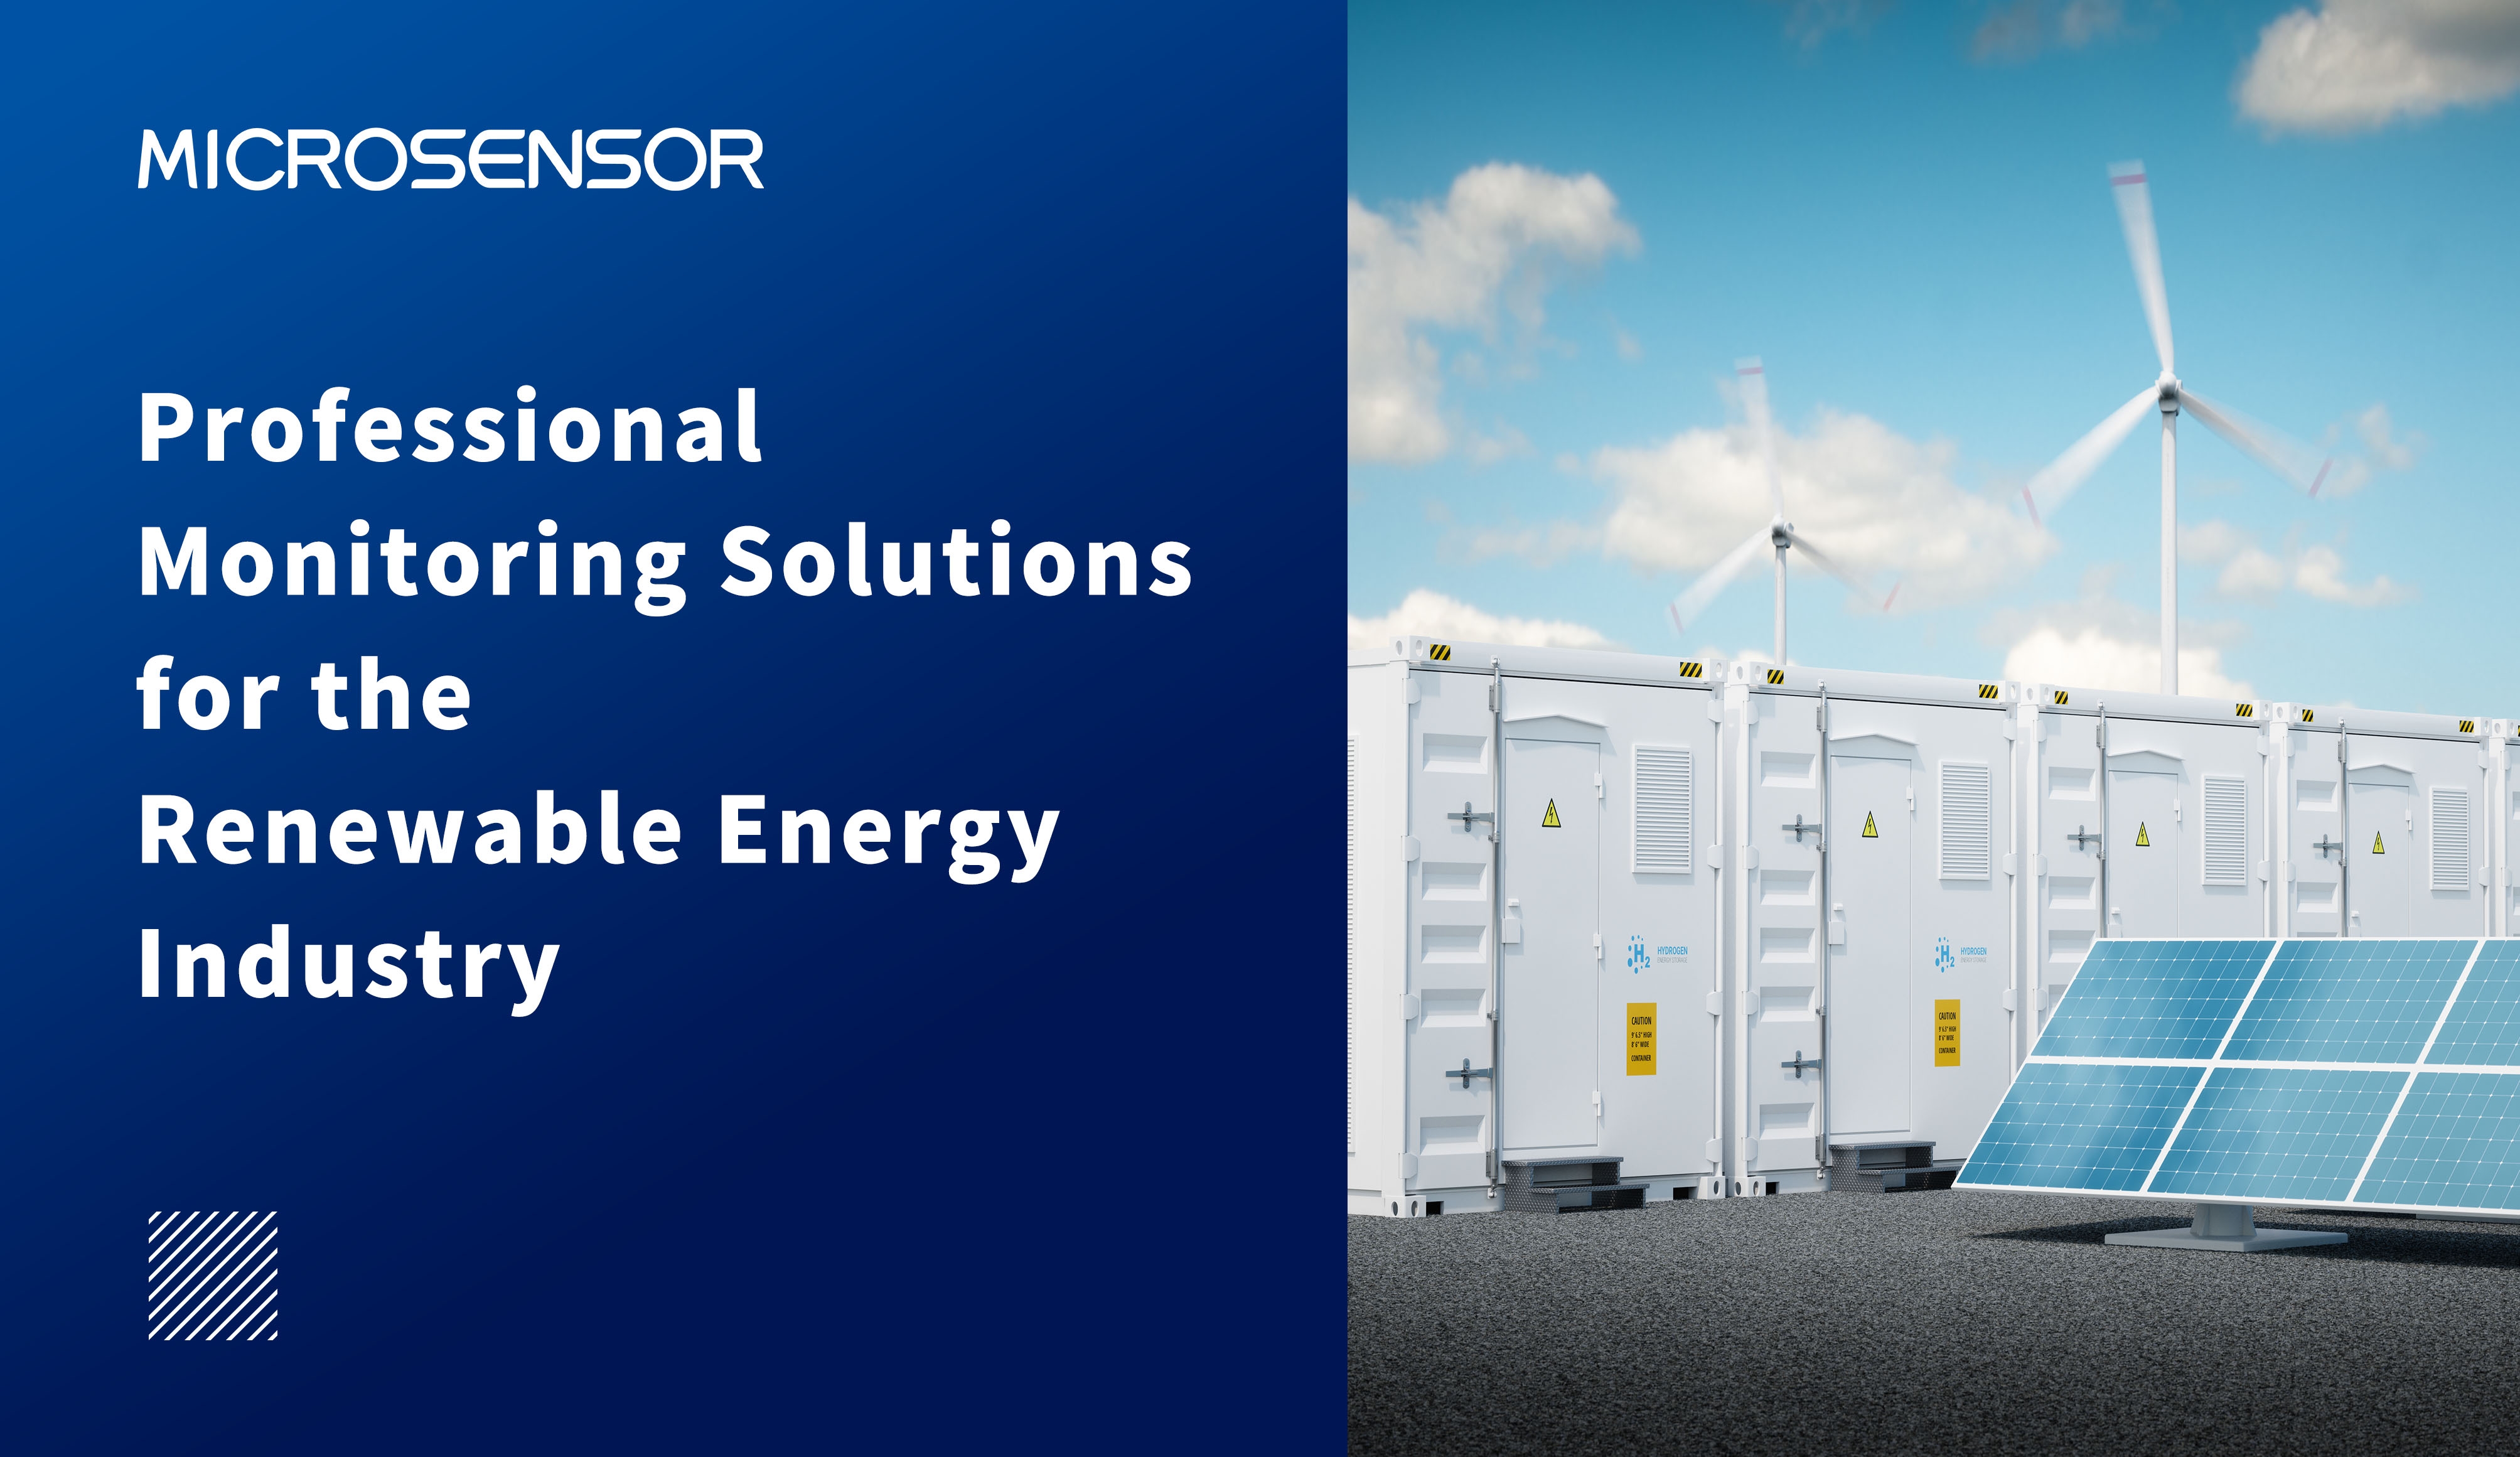 Professional Monitoring Solutions for the Renewable Energy Industry